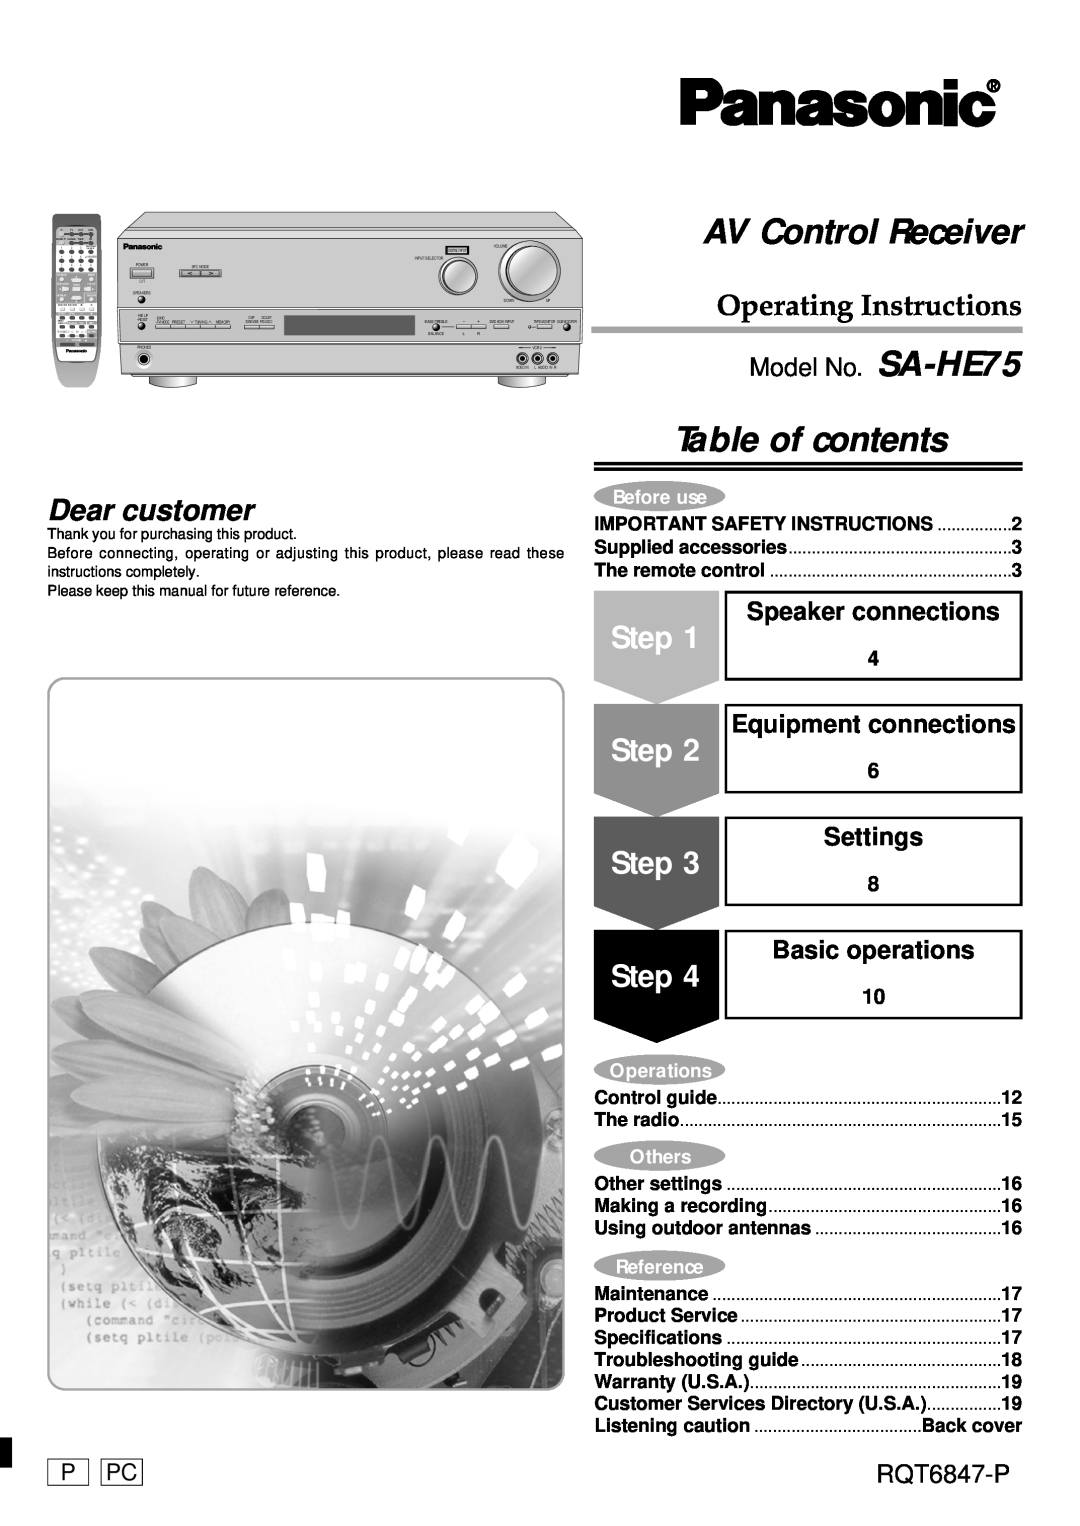 Panasonic important safety instructions Model No. SA-HE75, Speaker connections, Settings, Basic operations, RQT6847-P 